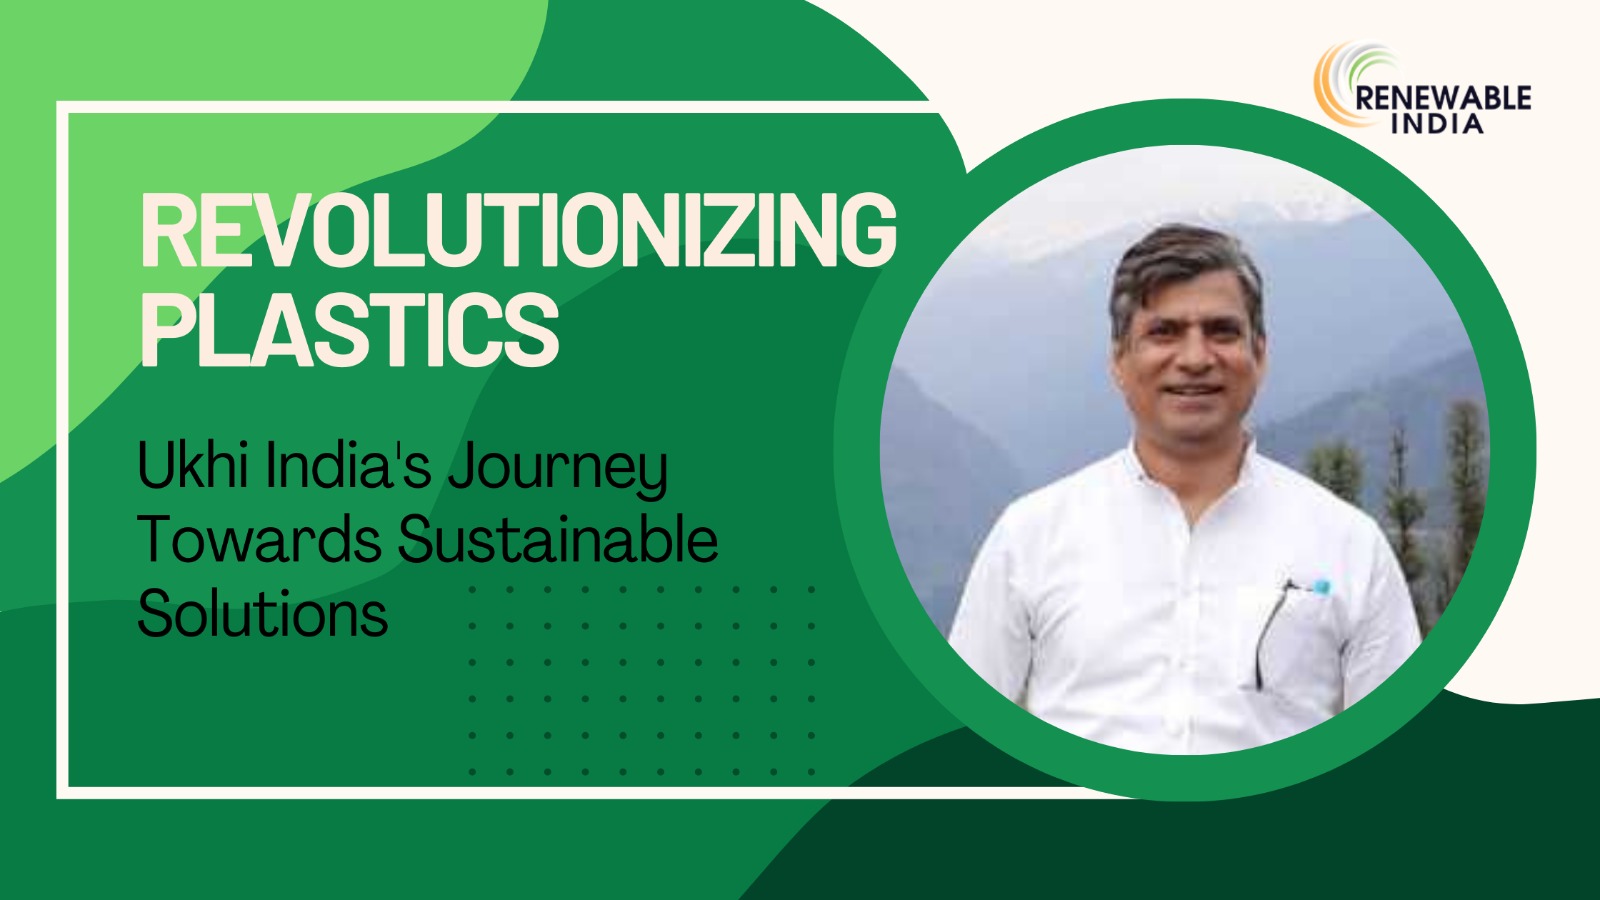 Ukhi India: Pioneering Sustainable Solutions to Plastic Pollution